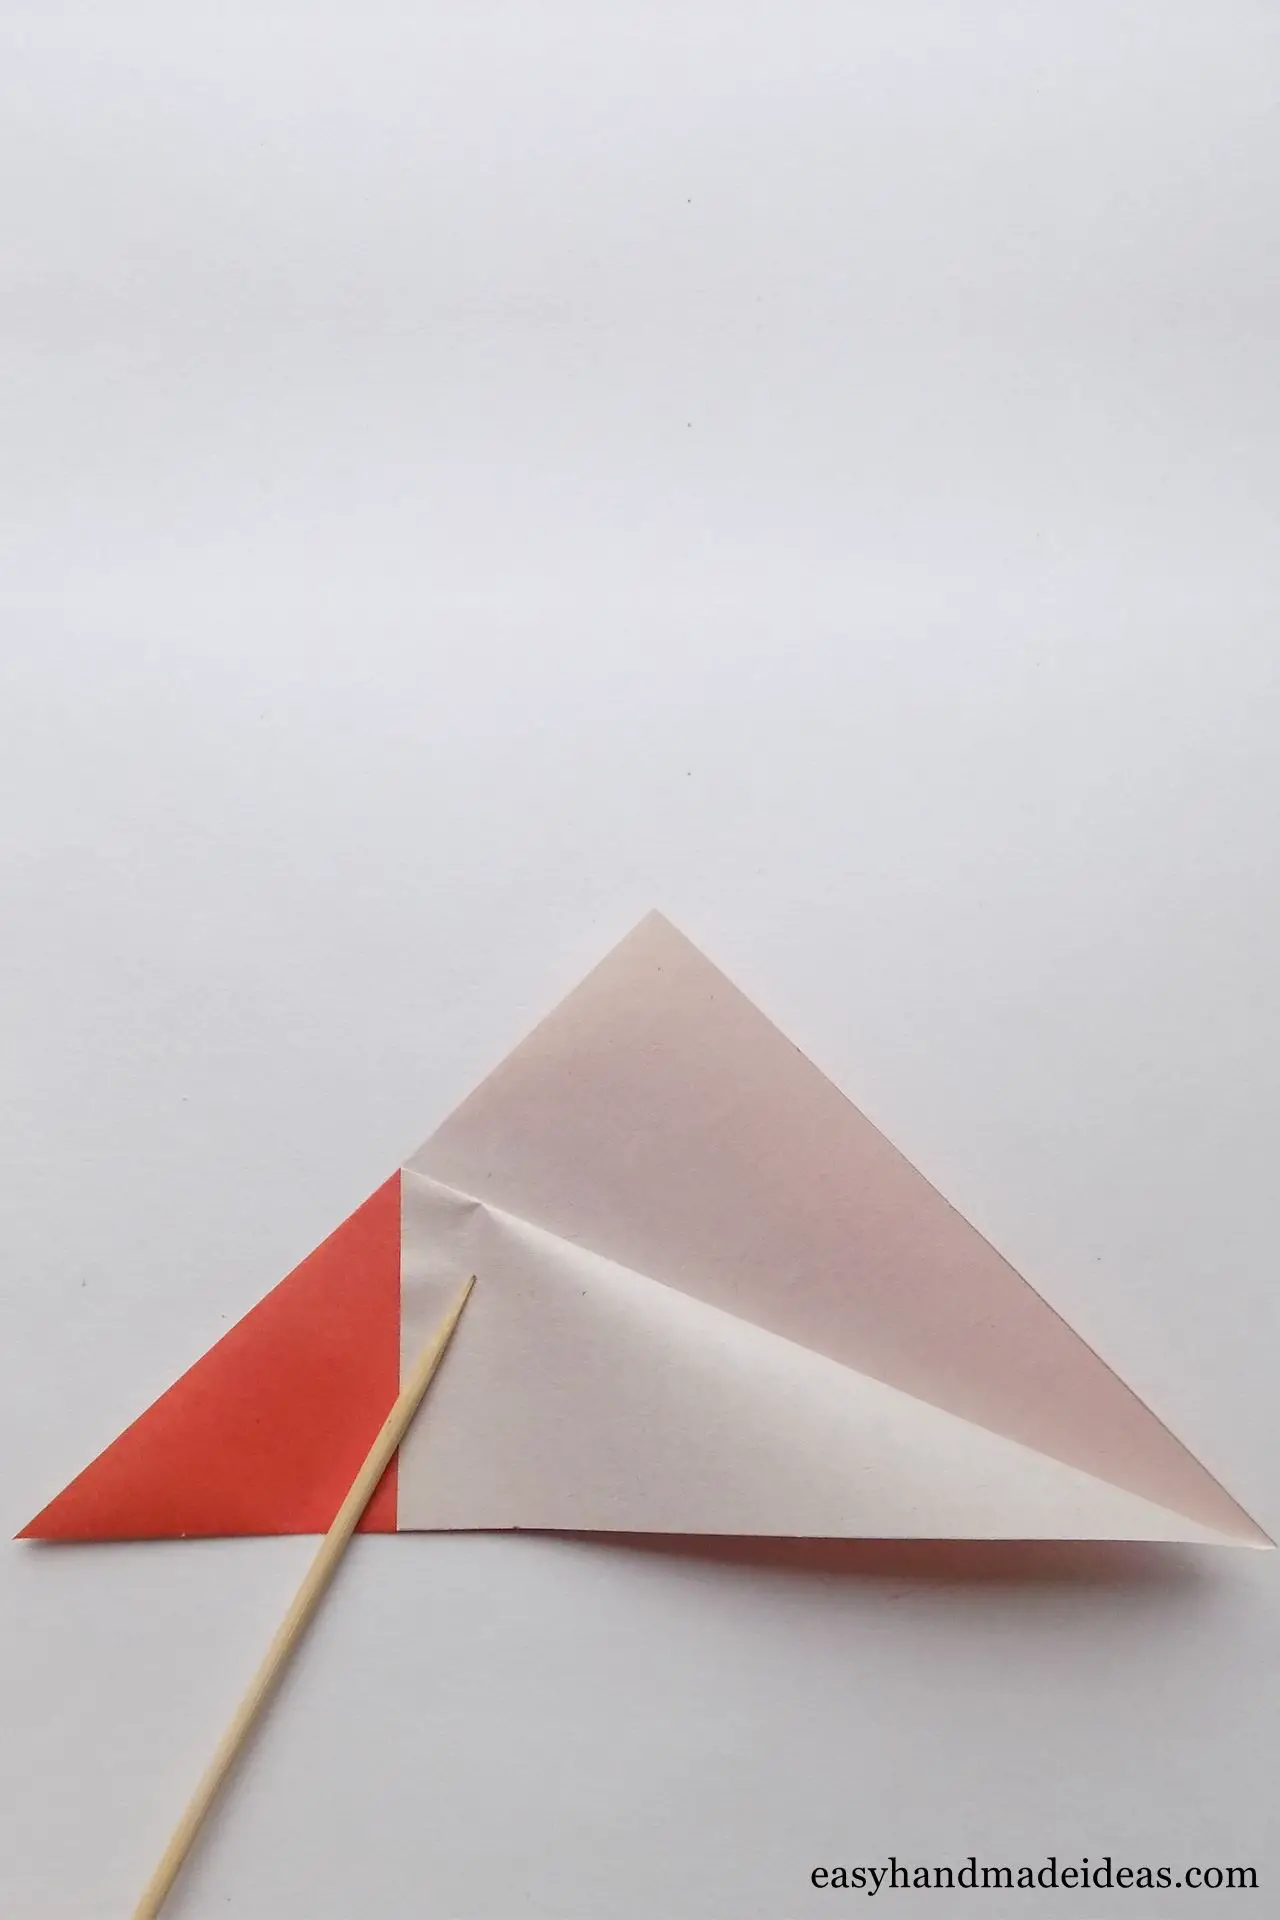 Mark only the fold on the left side of the triangle